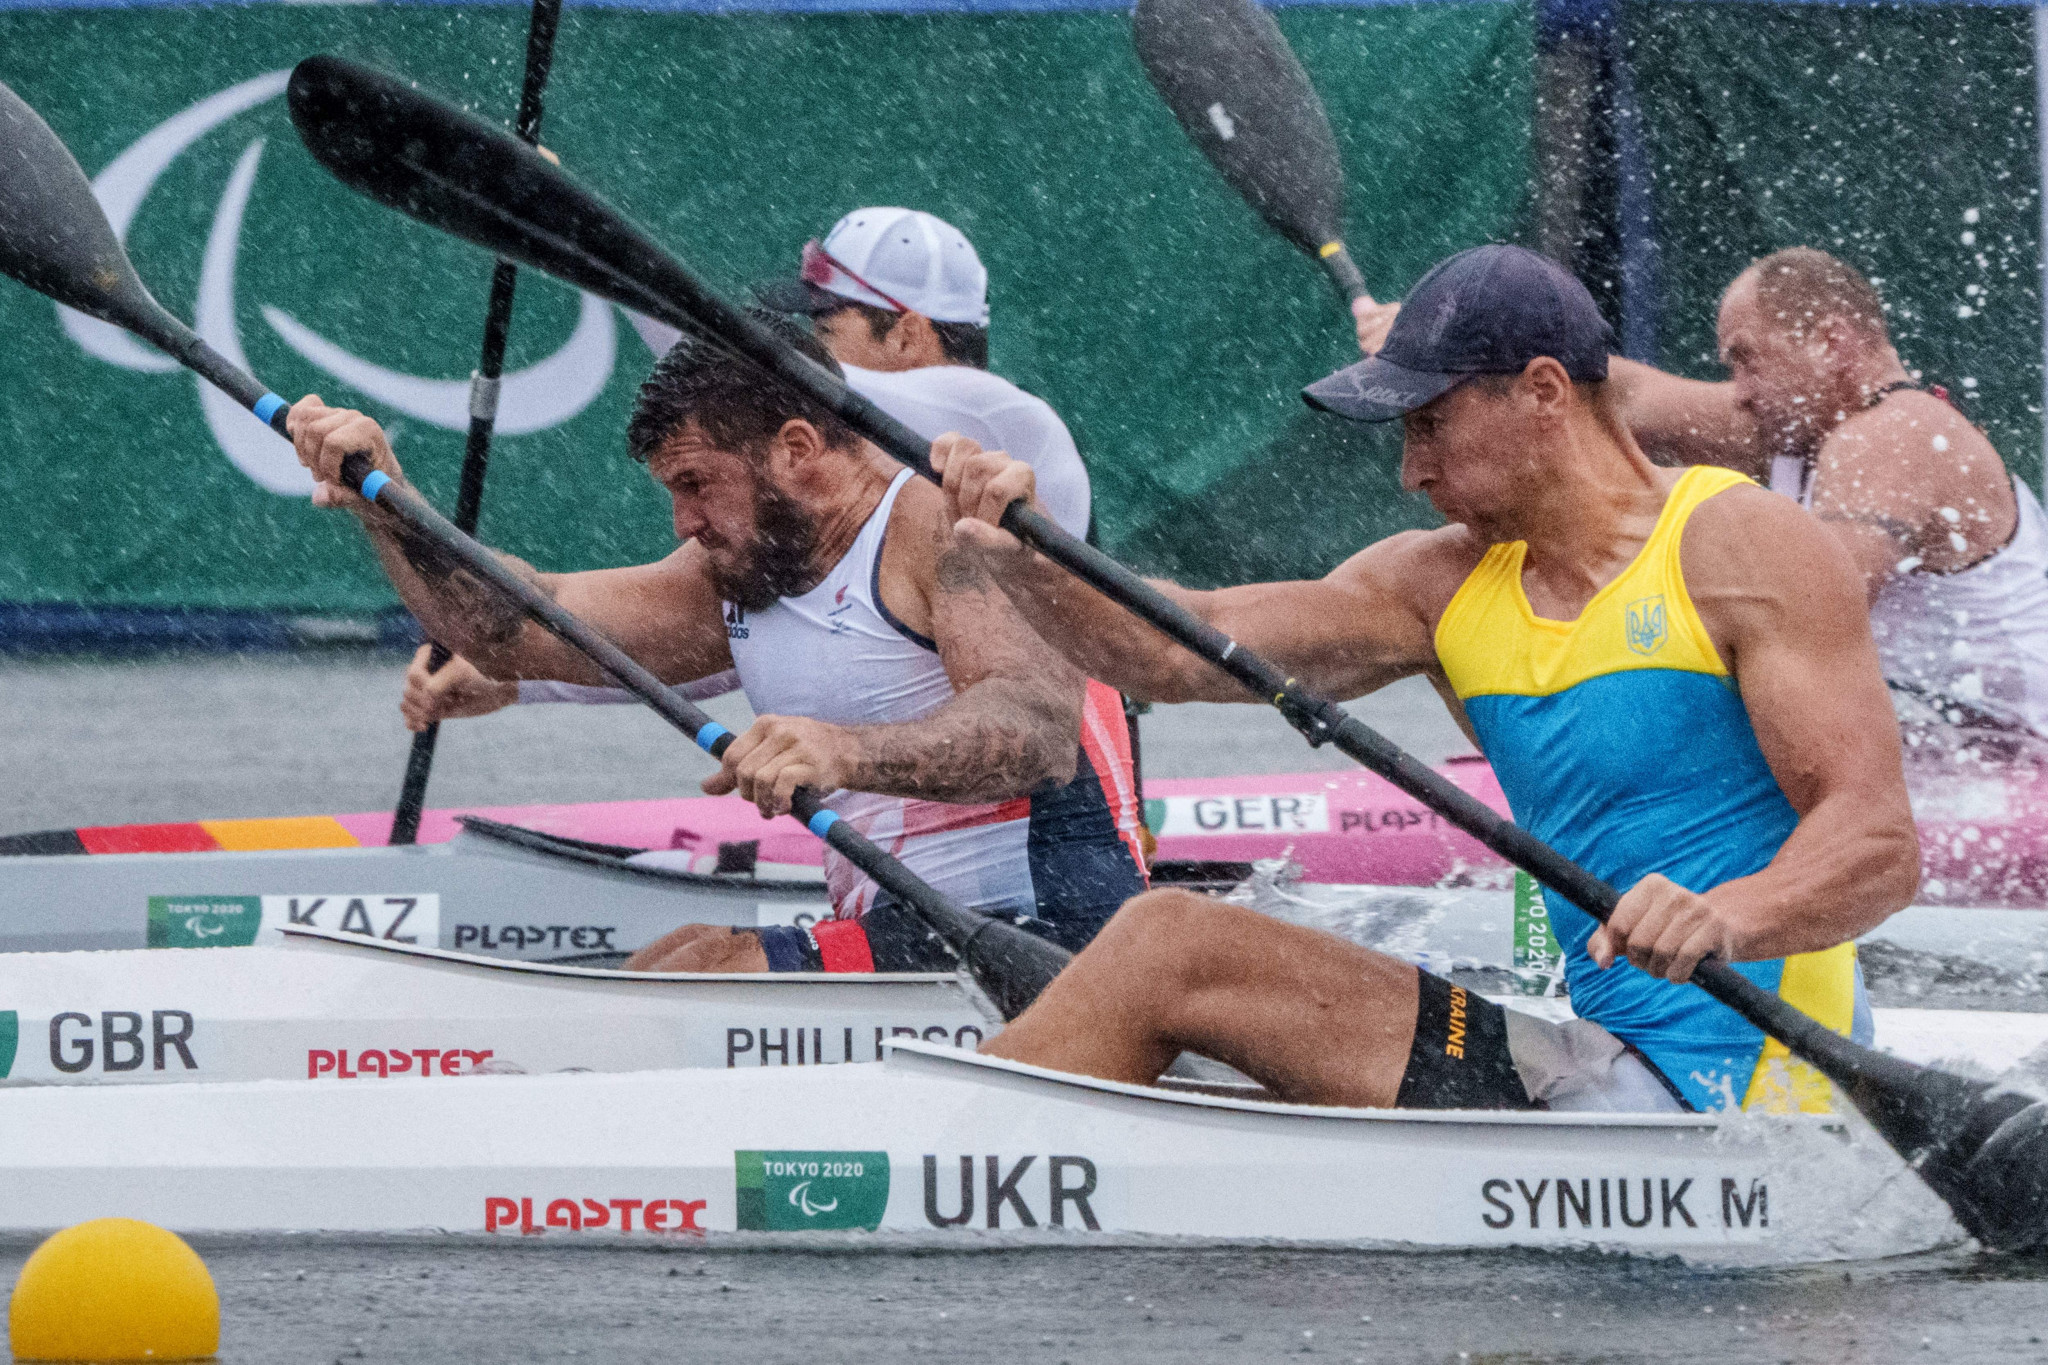 Ukraine's Mykola Syniuk, front, a silver medallist at Tokyo 2020, was the top performer in the men's KL2 200m heats at the ICF Paracanoe World Cup in Poznań ©Getty Images